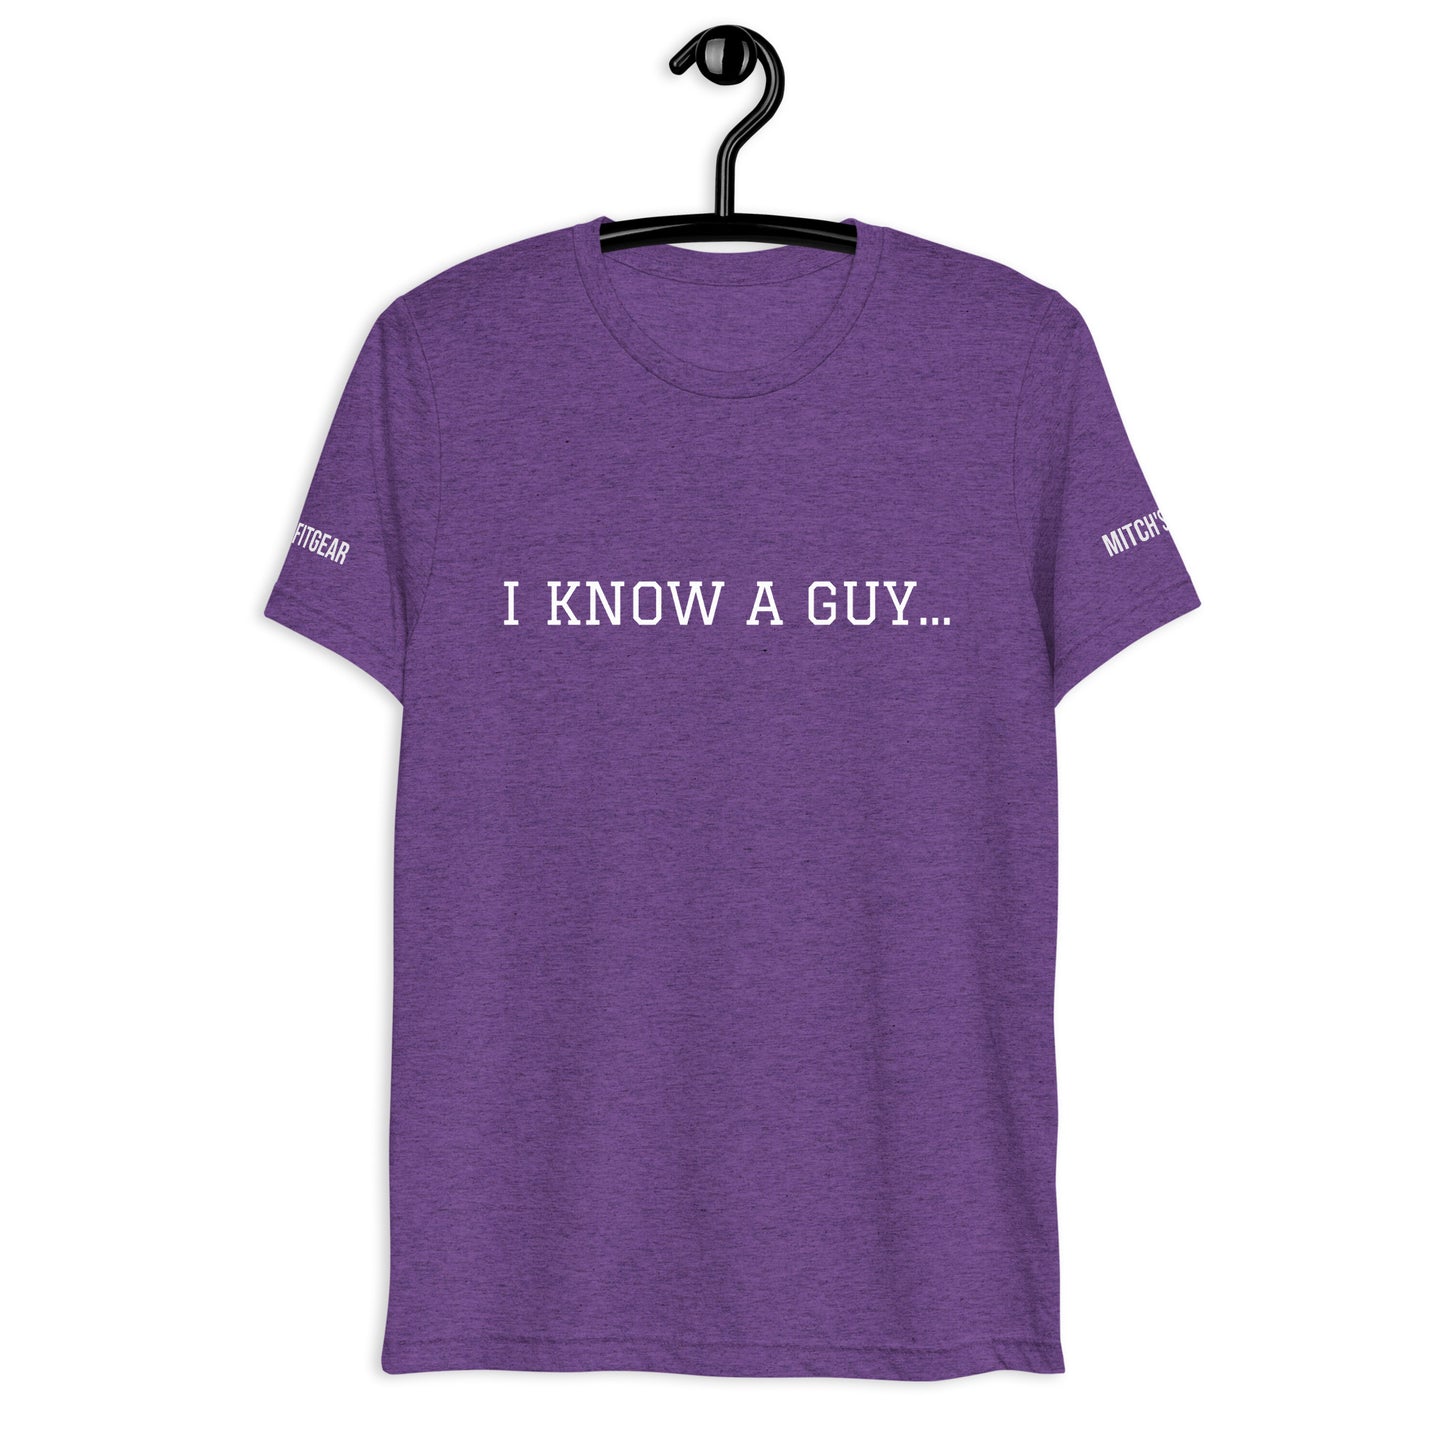 I KNOW A GUY...Short sleeve t-shirt